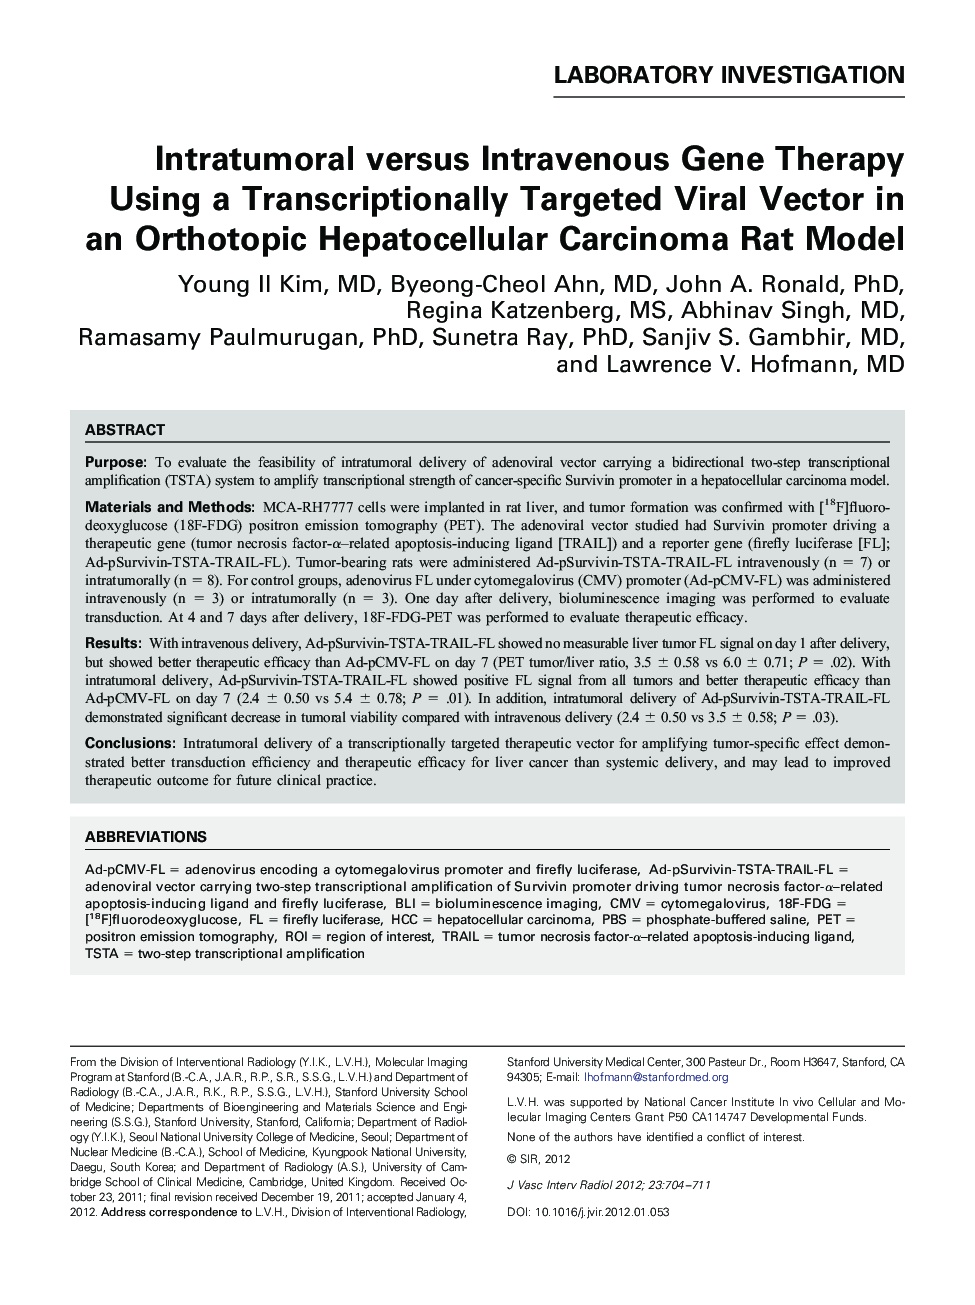 Intratumoral versus Intravenous Gene Therapy Using a Transcriptionally Targeted Viral Vector in an Orthotopic Hepatocellular Carcinoma Rat Model